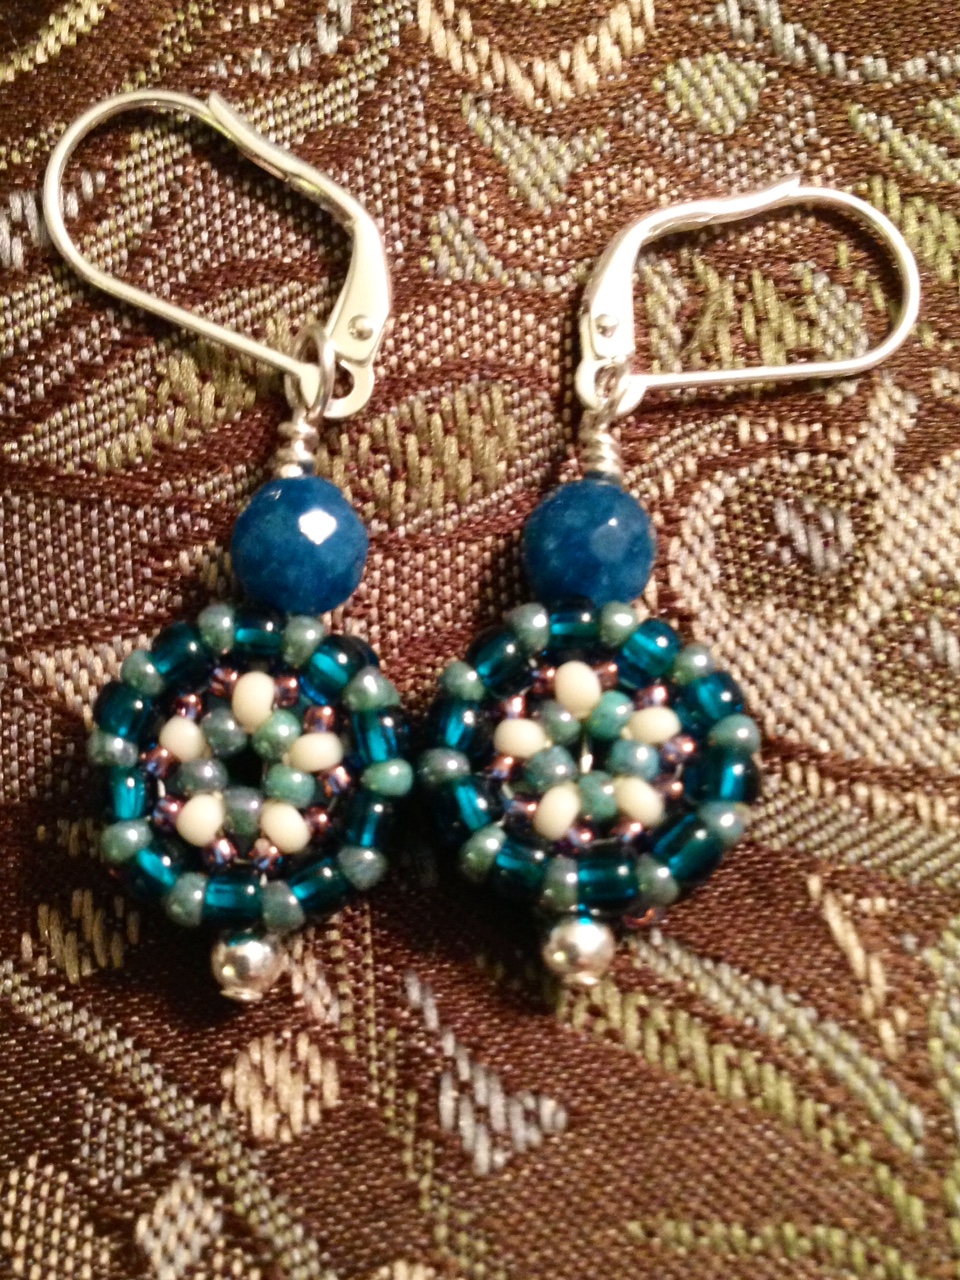 AJE Component of the Month - My Turn - Beaded Beads!